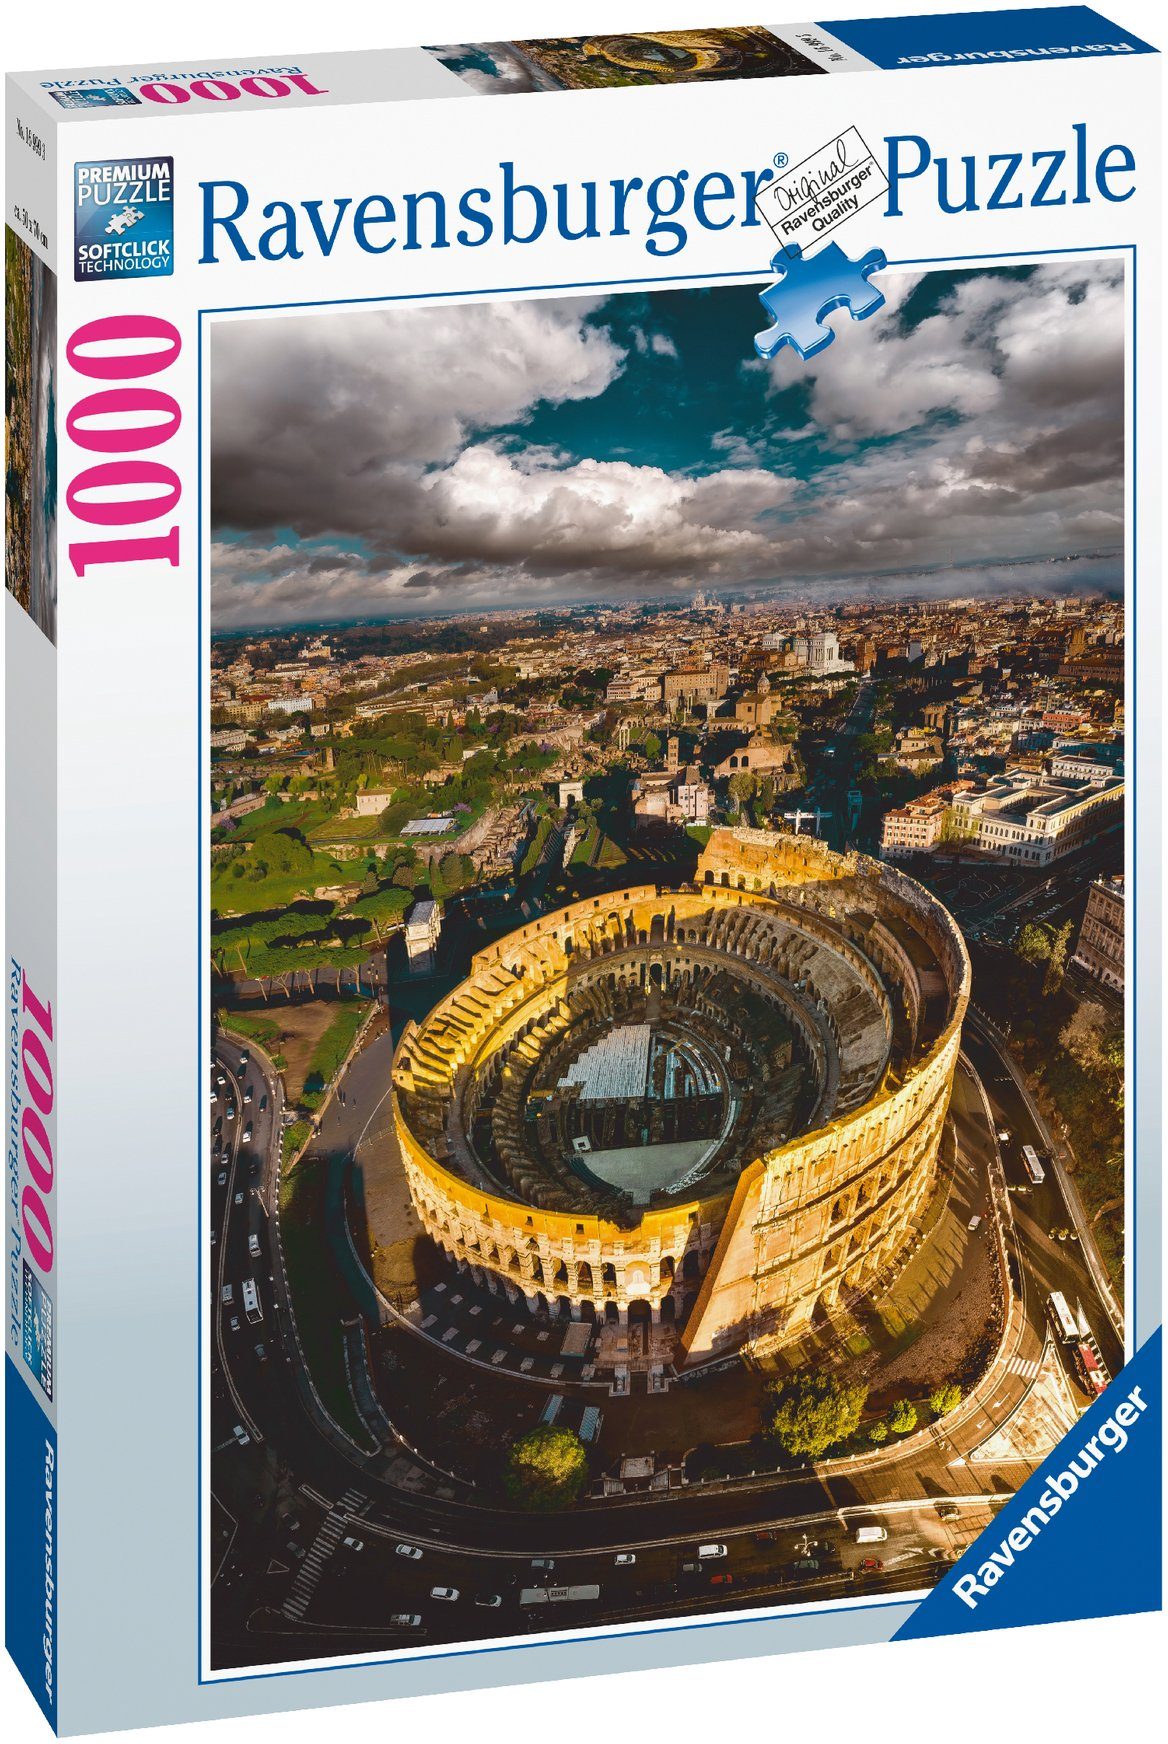 schützt in FSC® Made Puzzleteile, - Wald 1000 weltweit Germany, in Puzzle - Colosseum Rom, Ravensburger